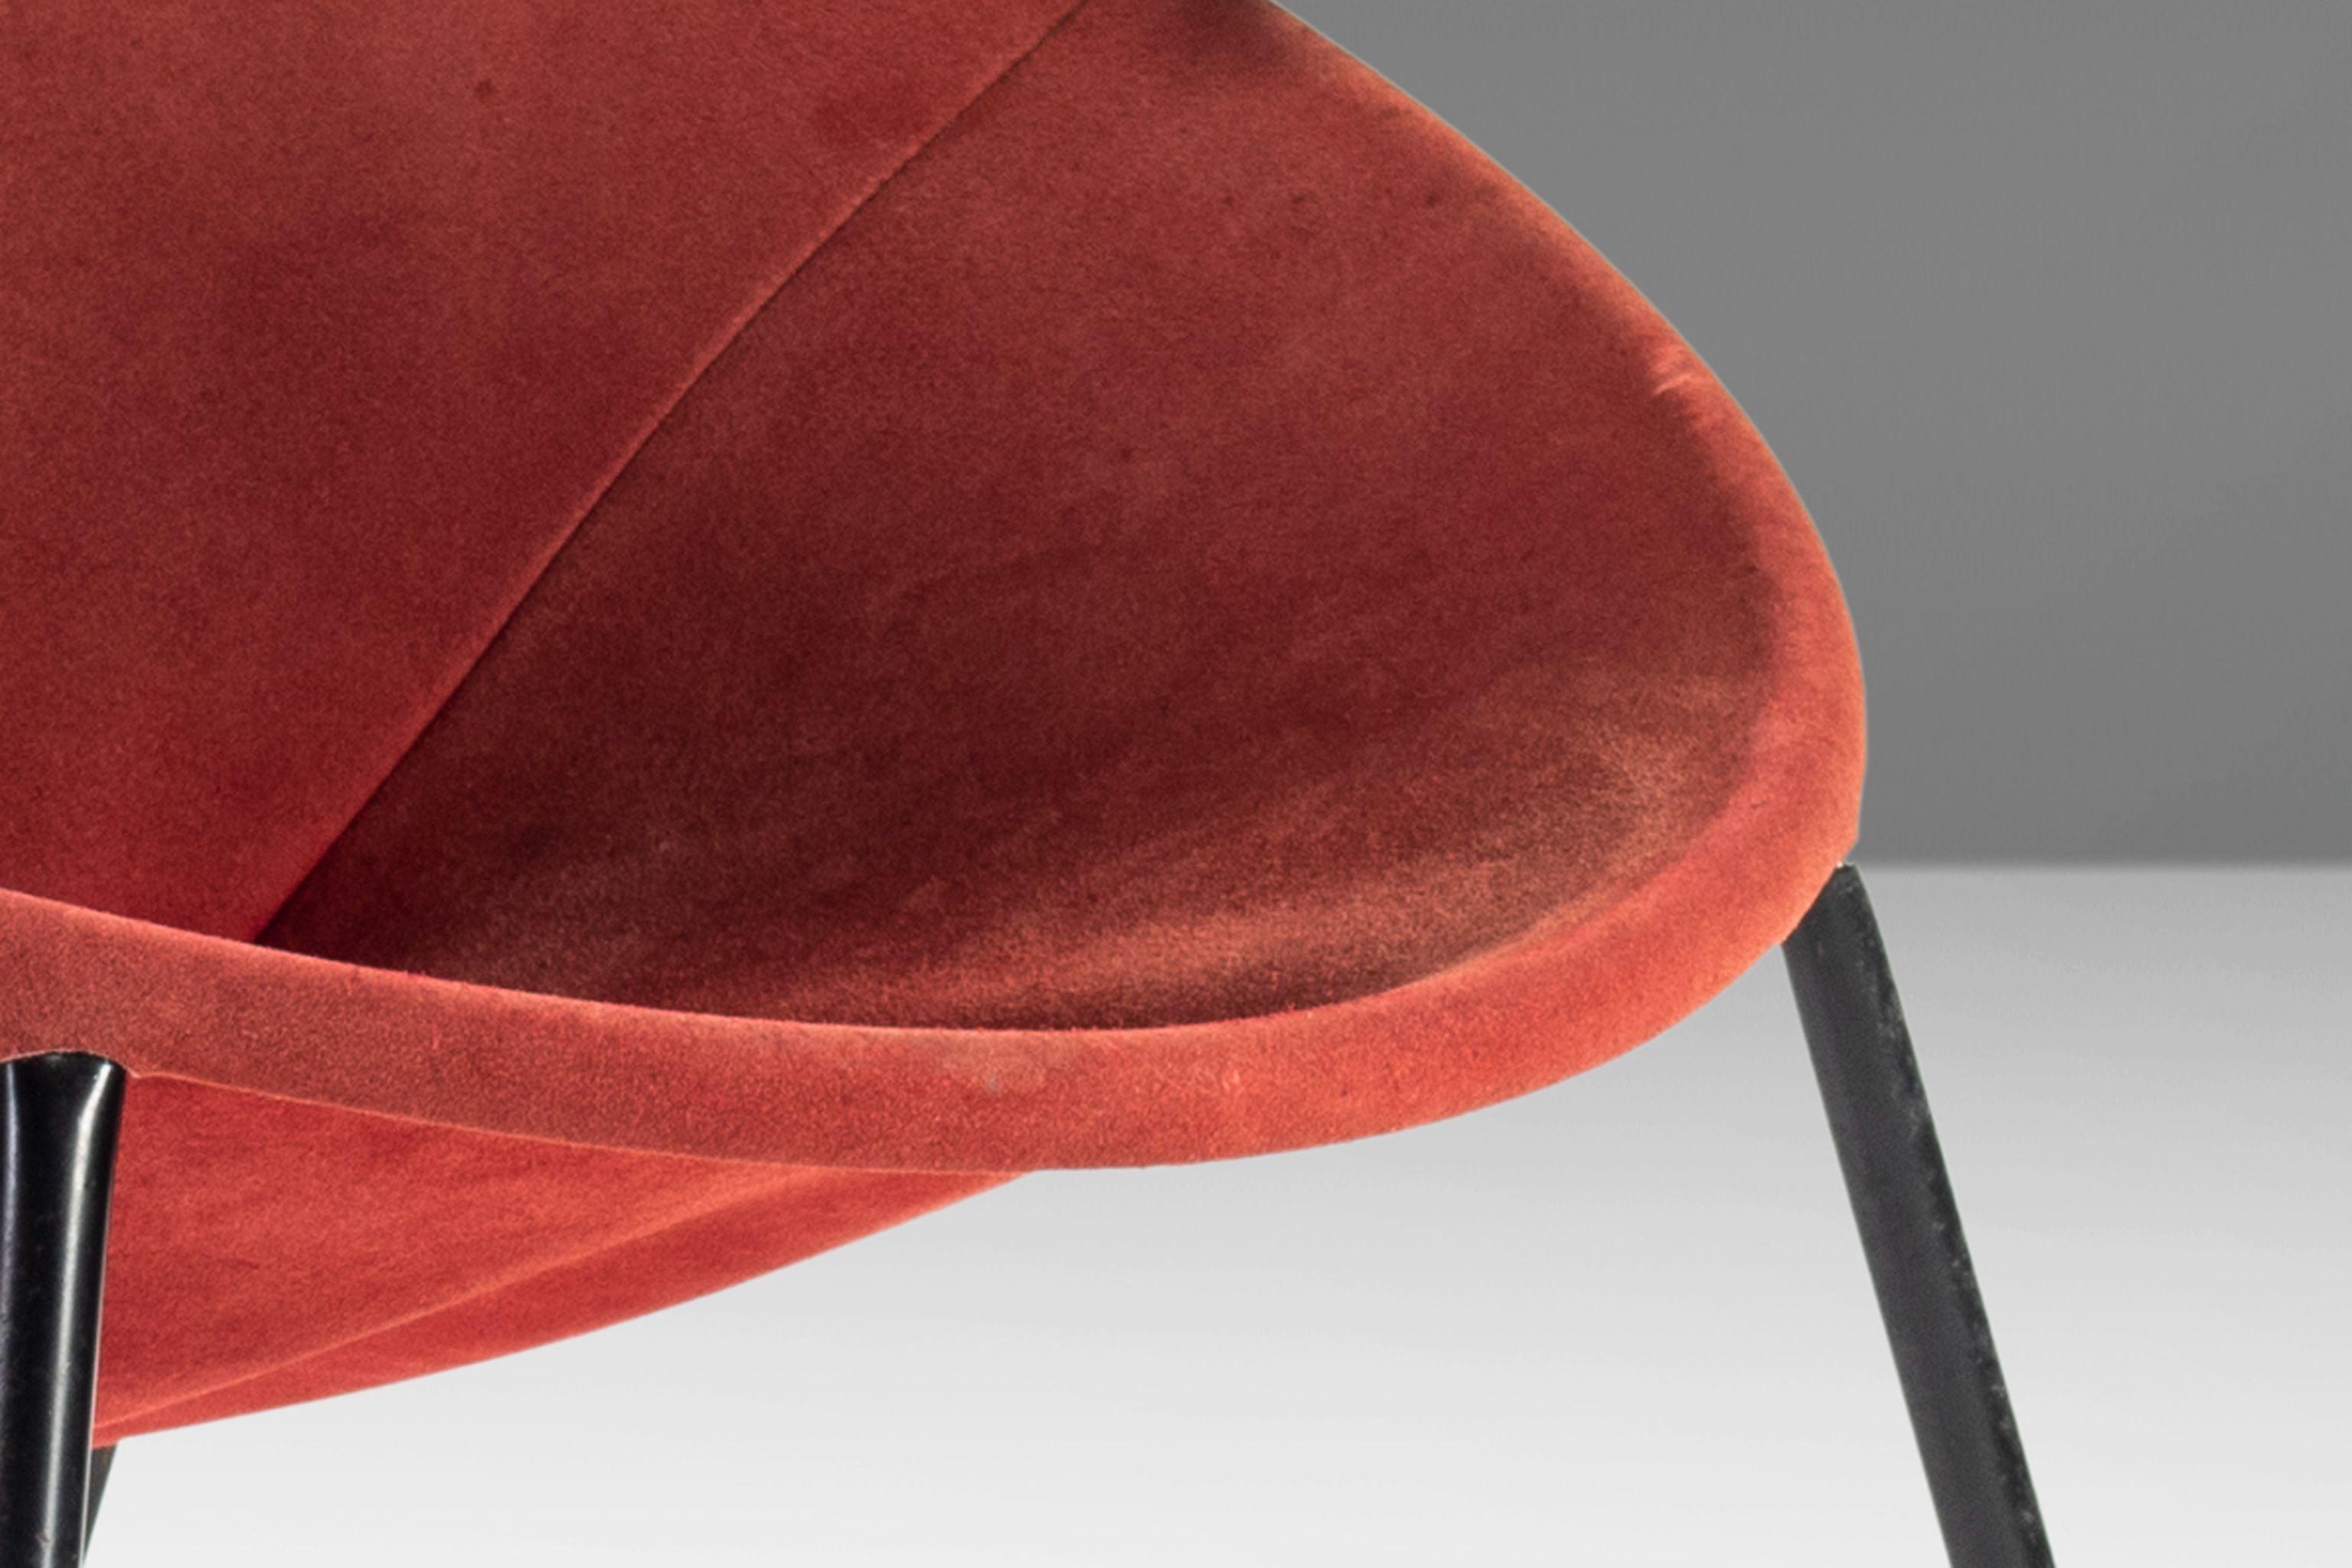 Mid Century Balloon / Hoop Chair in Red Dyed Suede by Hans Olsen, Denmark, 1960s For Sale 5